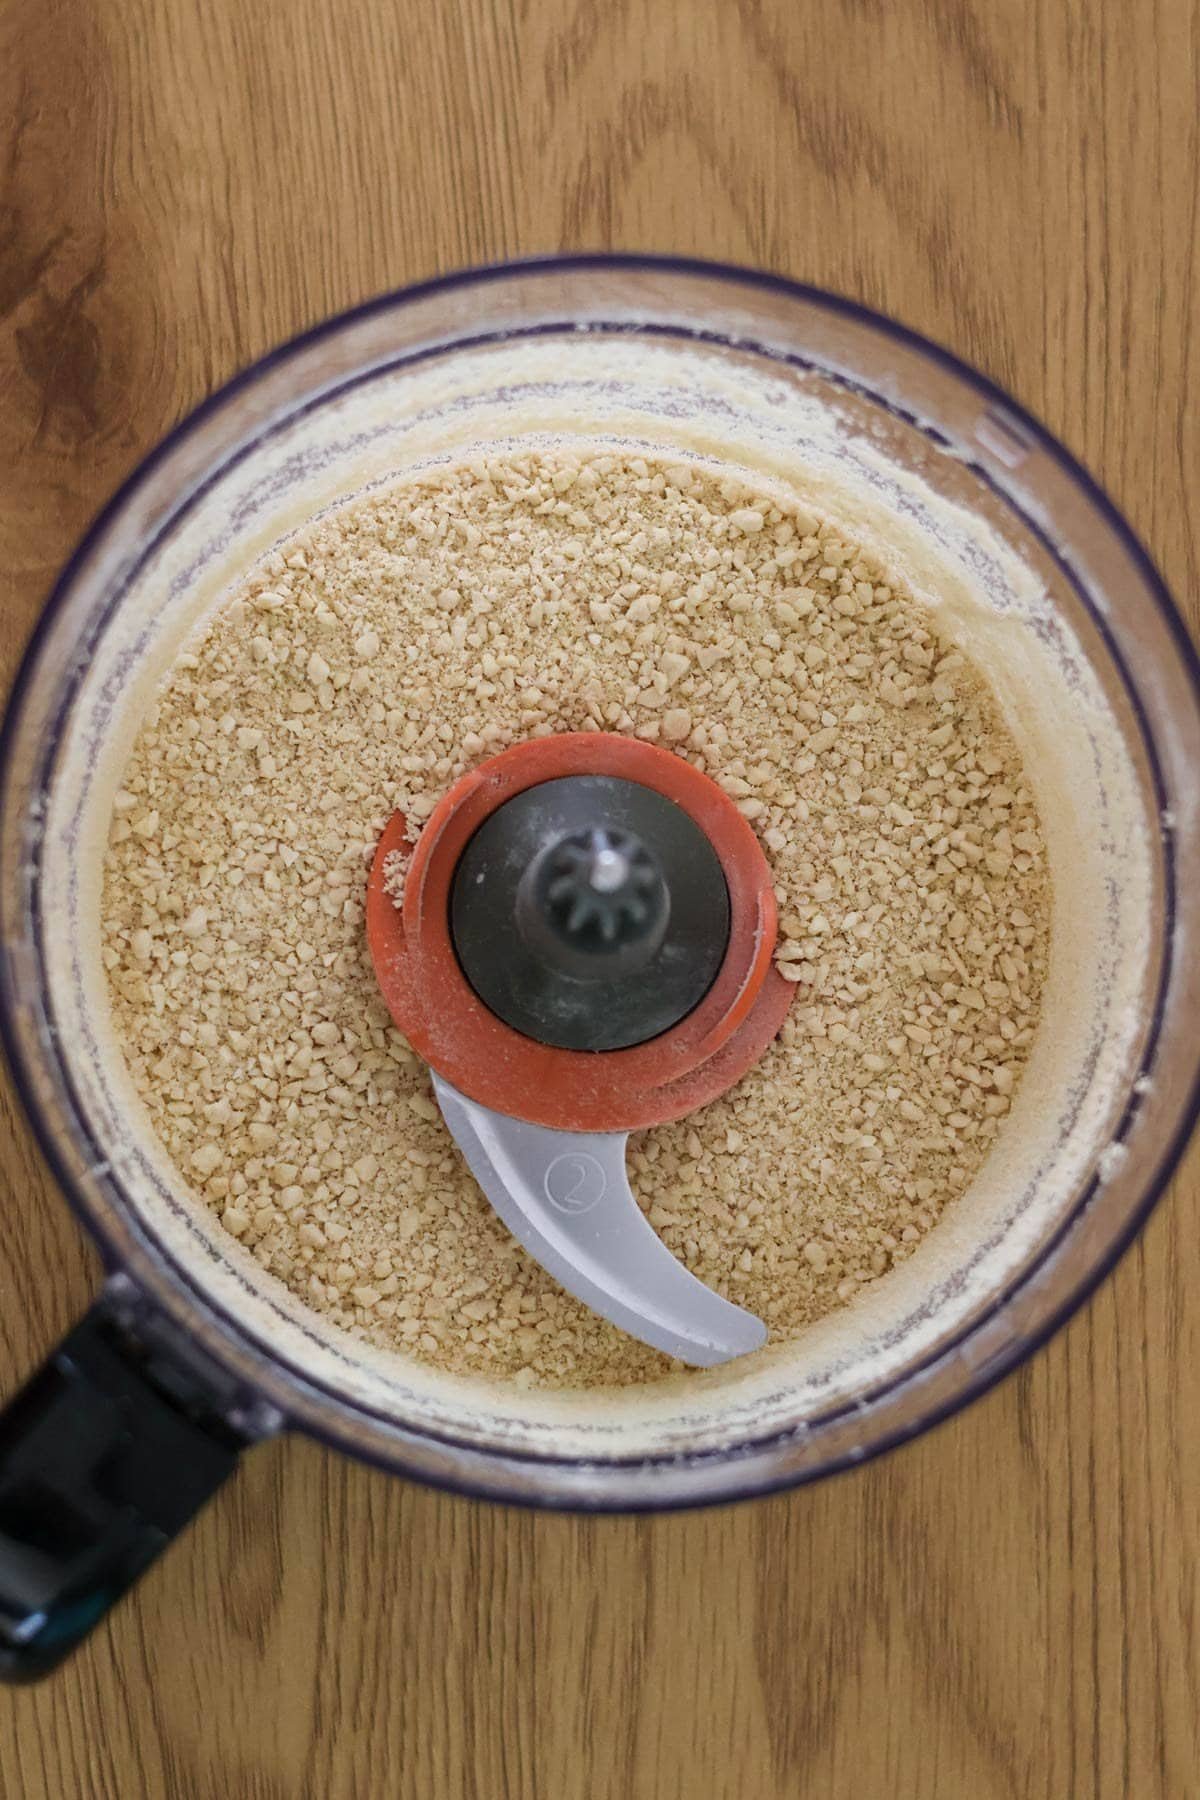 the ingredients for the vegan parmesan cheese recipe are ground in a food processor.